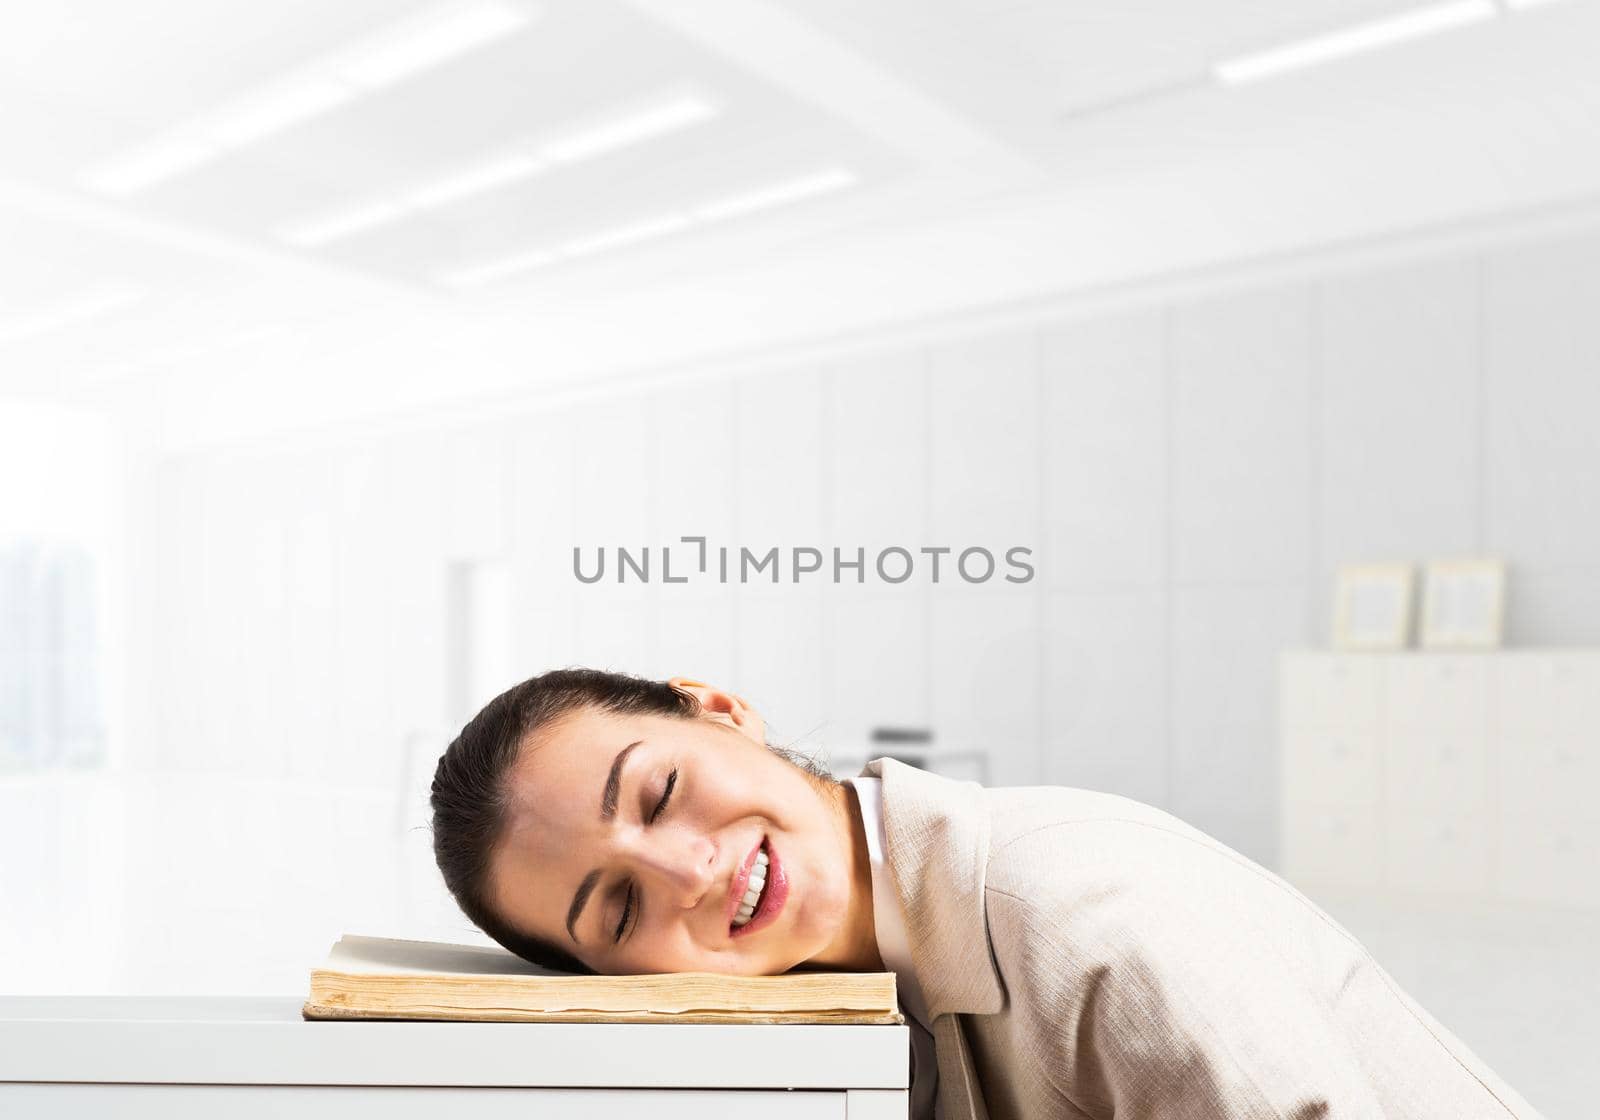 Exhausted business woman sleeping on desk with open notebook. Tired corporate employee relaxing in office. Young female worker in white suit overworking. Accounting and paperwork deadline concept.